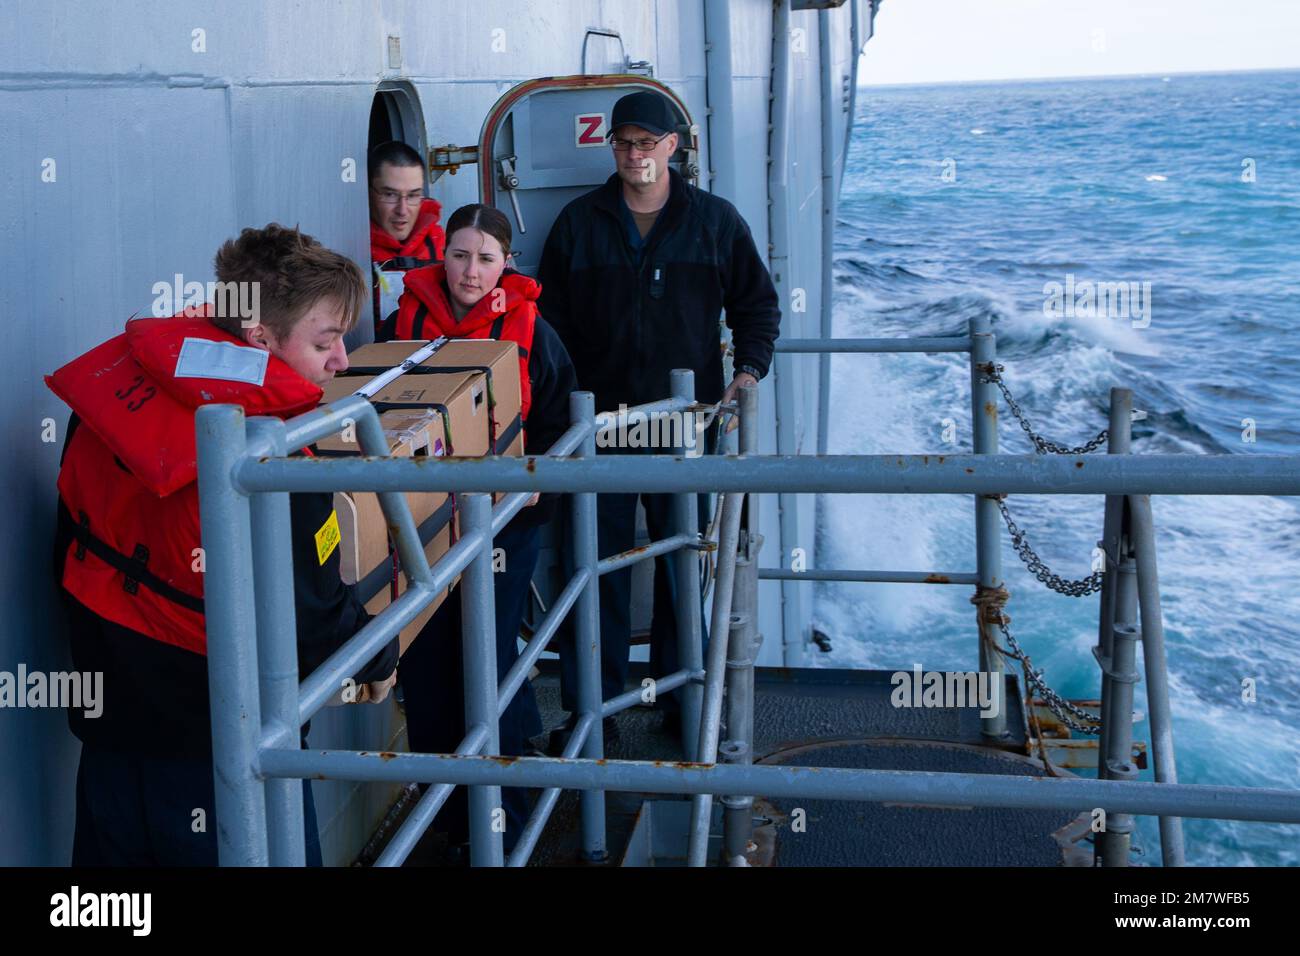 220515-N-CM110-1027 PACIFIC OCEAN (May 15, 2022) – Aerographer’s Mate 3rd Class Chase Mischka, from Santee, California, left, and Aerographer’s Mate 1st Class Ashley Mccown, from El Paso, Texas, carry a buoy aboard amphibious assault carrier USS Tripoli (LHA 7), May 15, 2022. Tripoli is underway conducting routine operations in U.S. 7th Fleet. Stock Photo